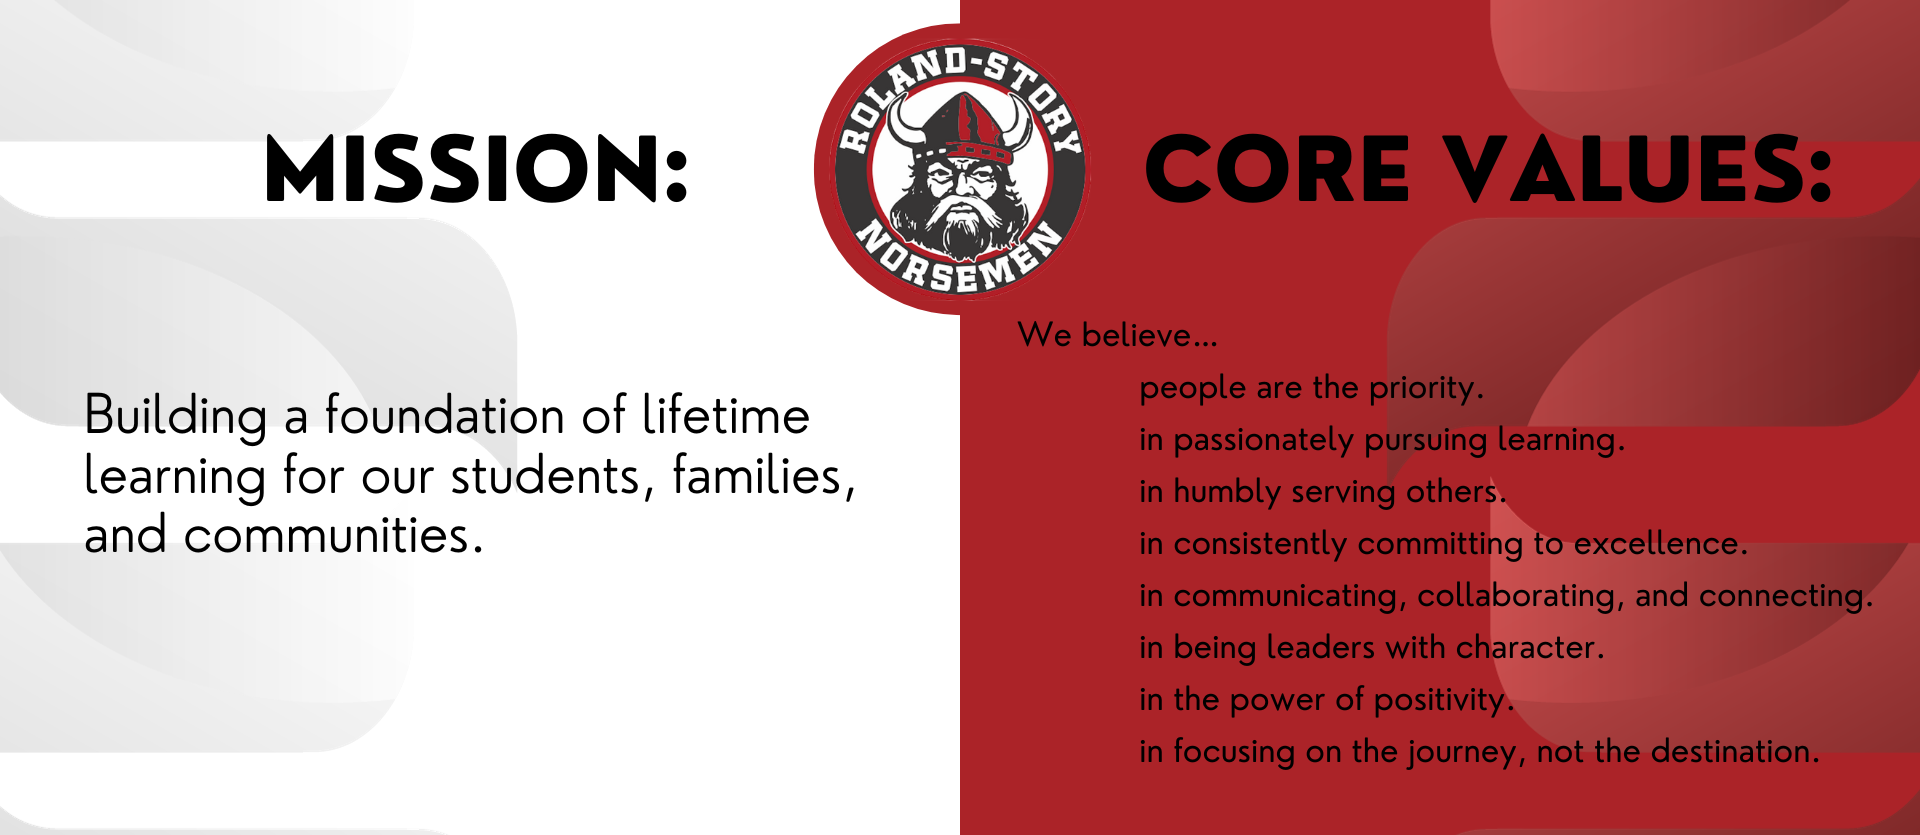 Mission Statement and Core Values